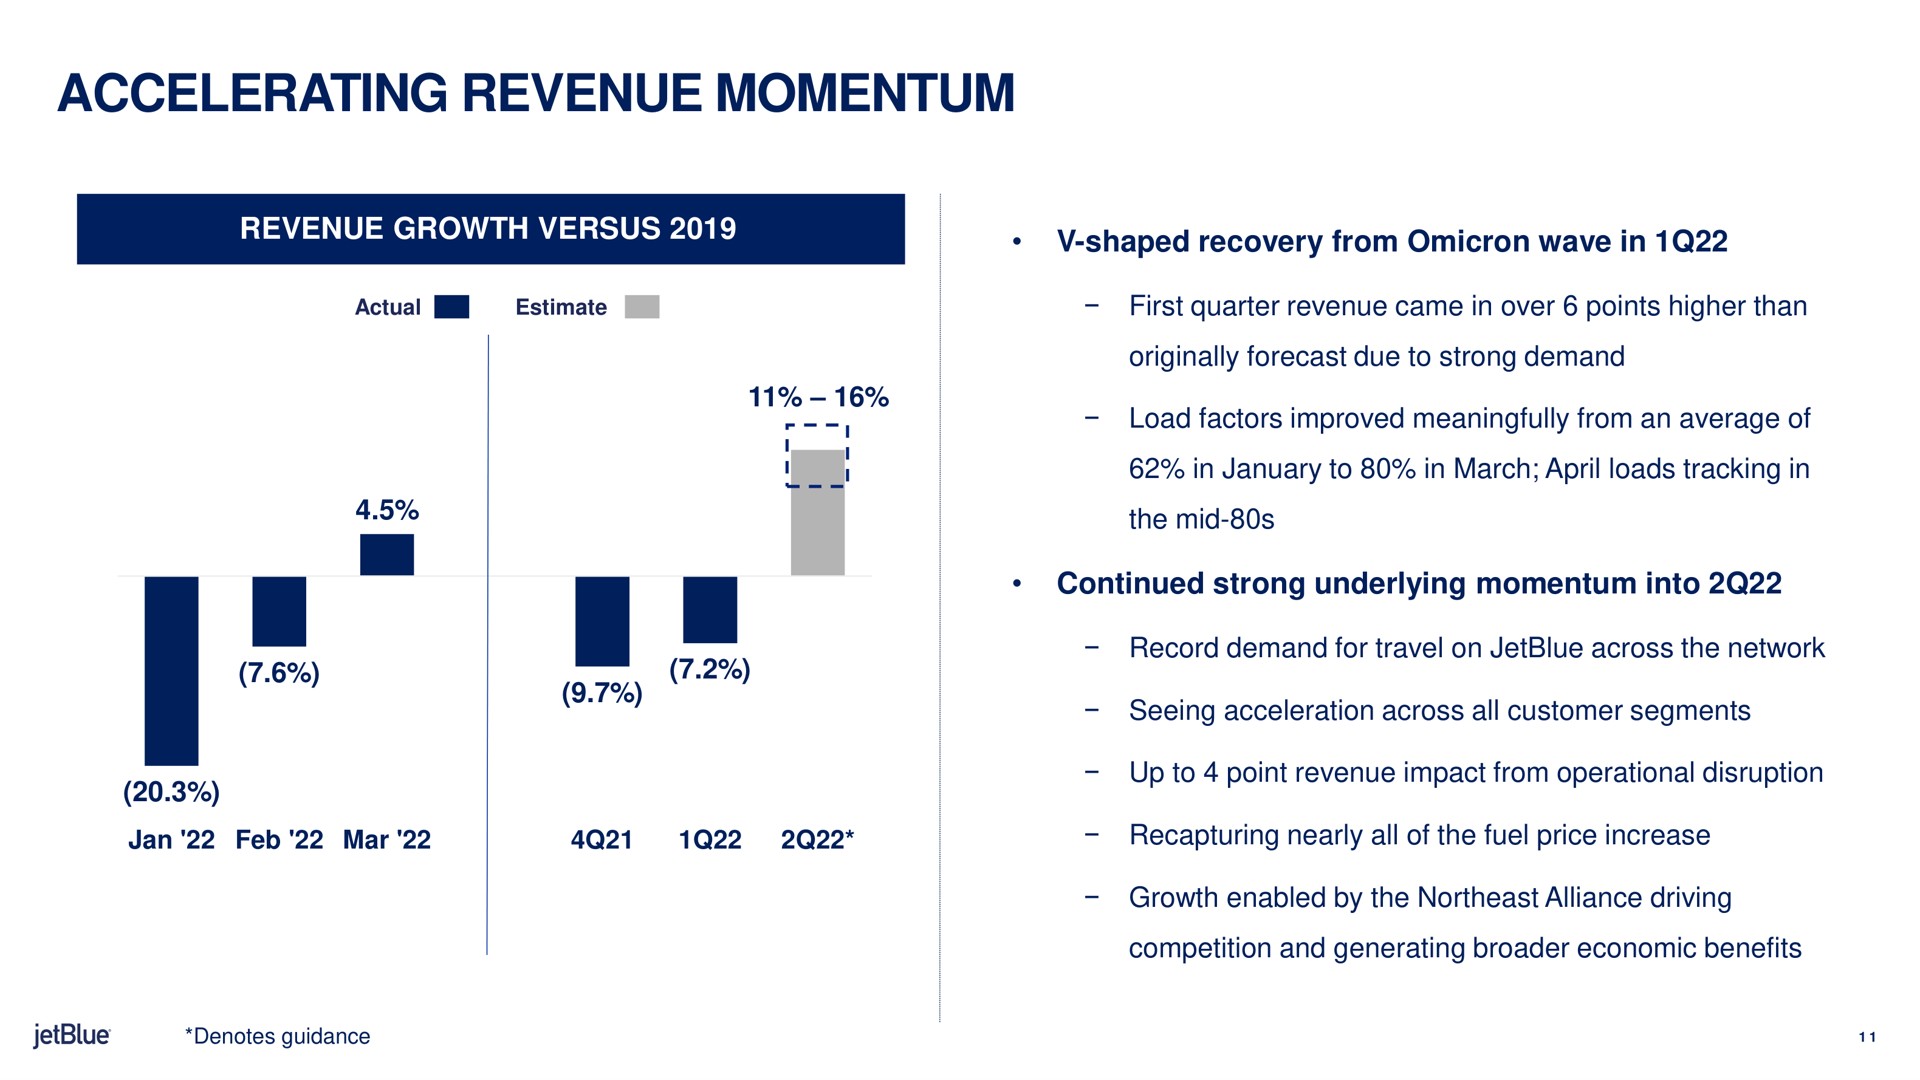 accelerating revenue momentum continued strong underlying into | jetBlue